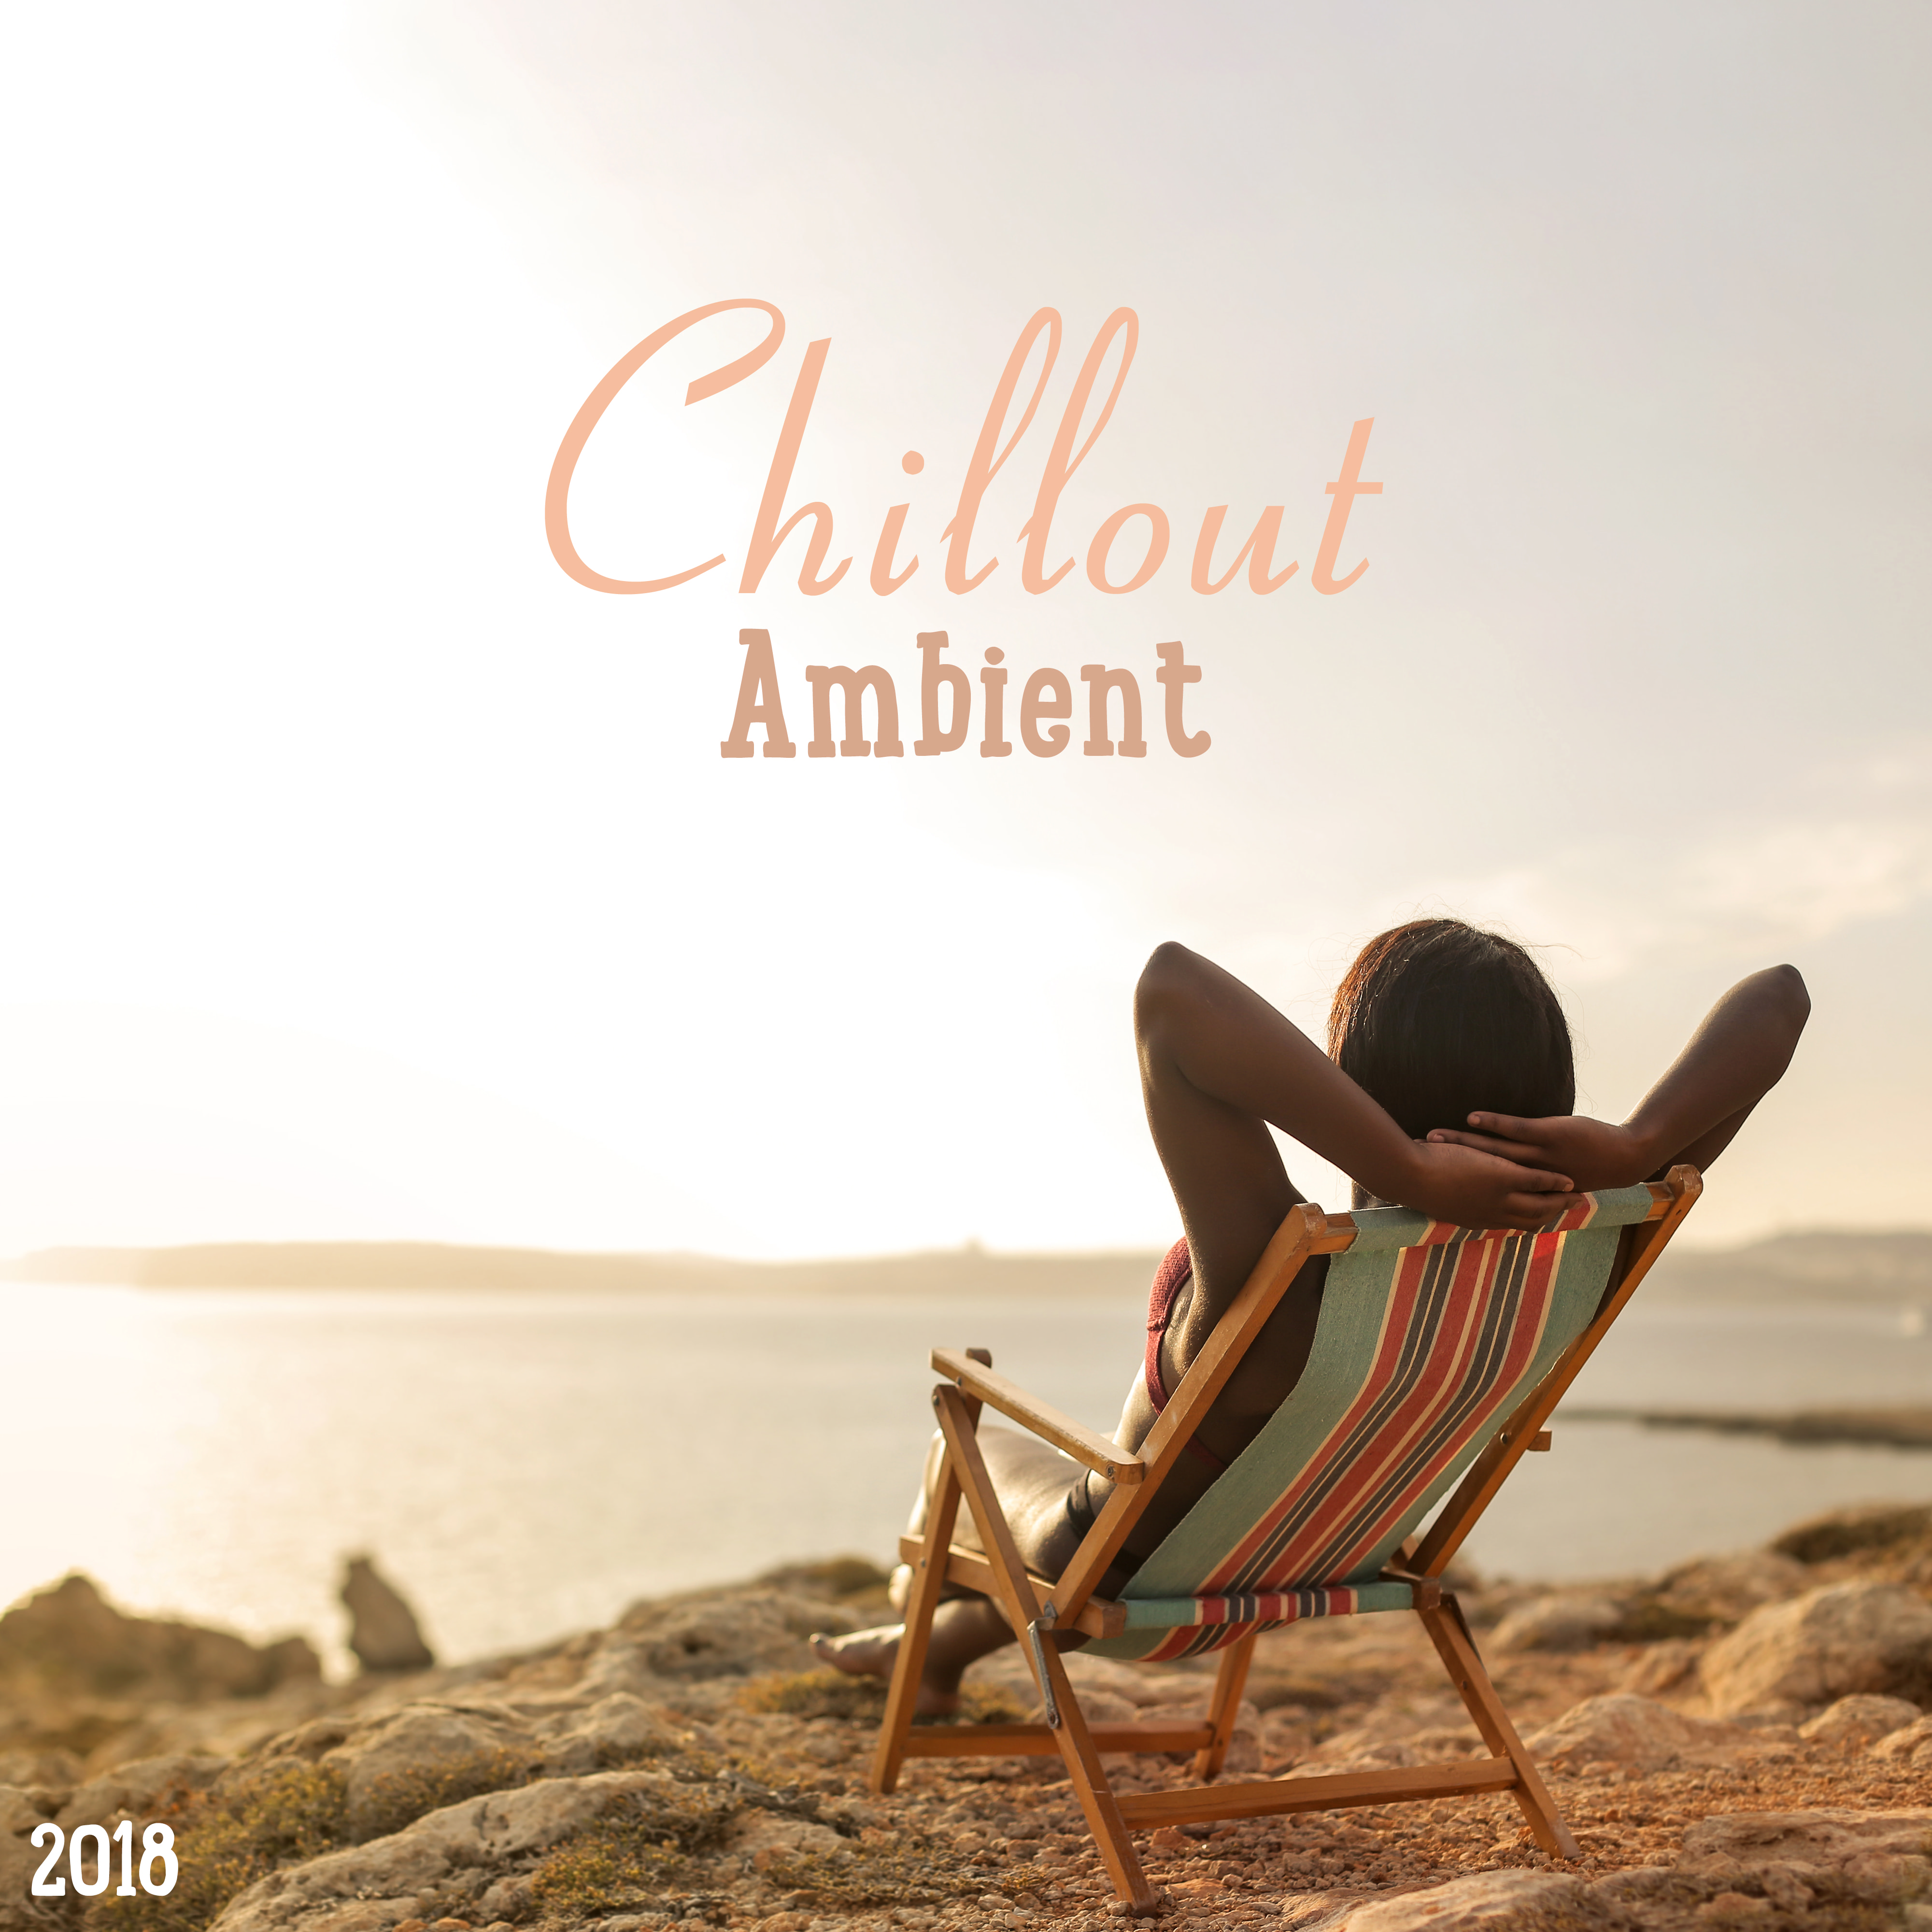 2018 Chillout Ambient